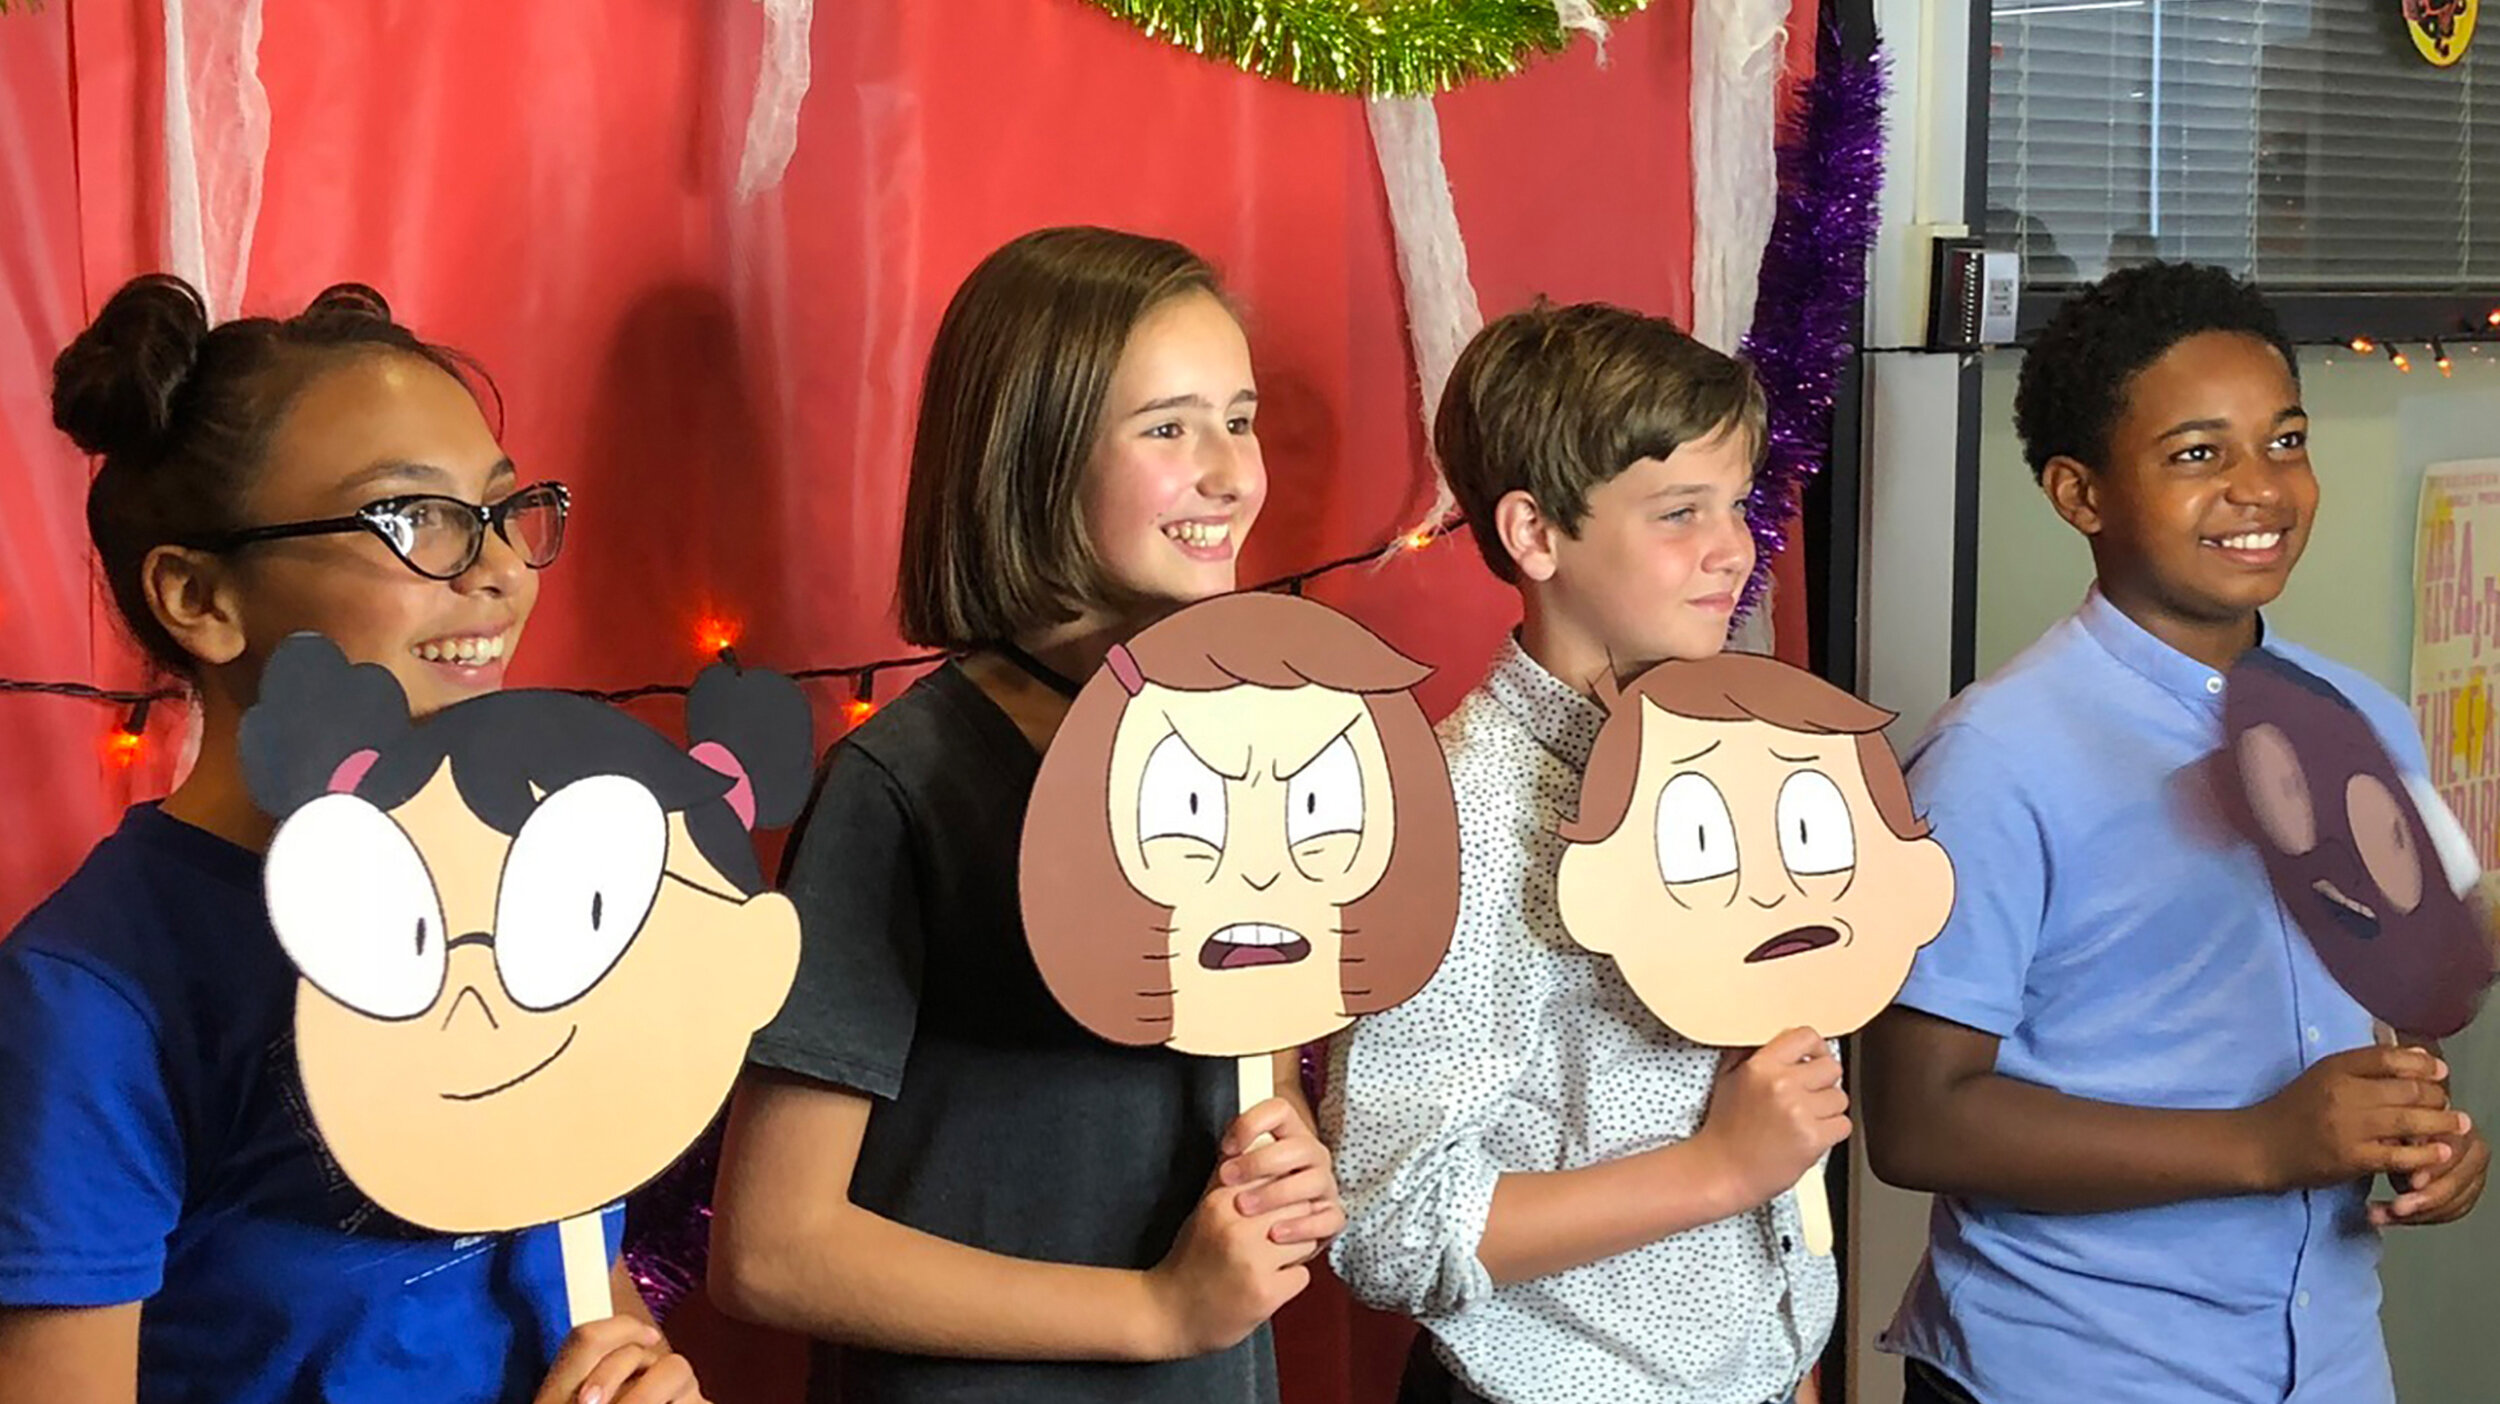 Kidscreen » Archive » Rick and Morty prodco builds first kids show